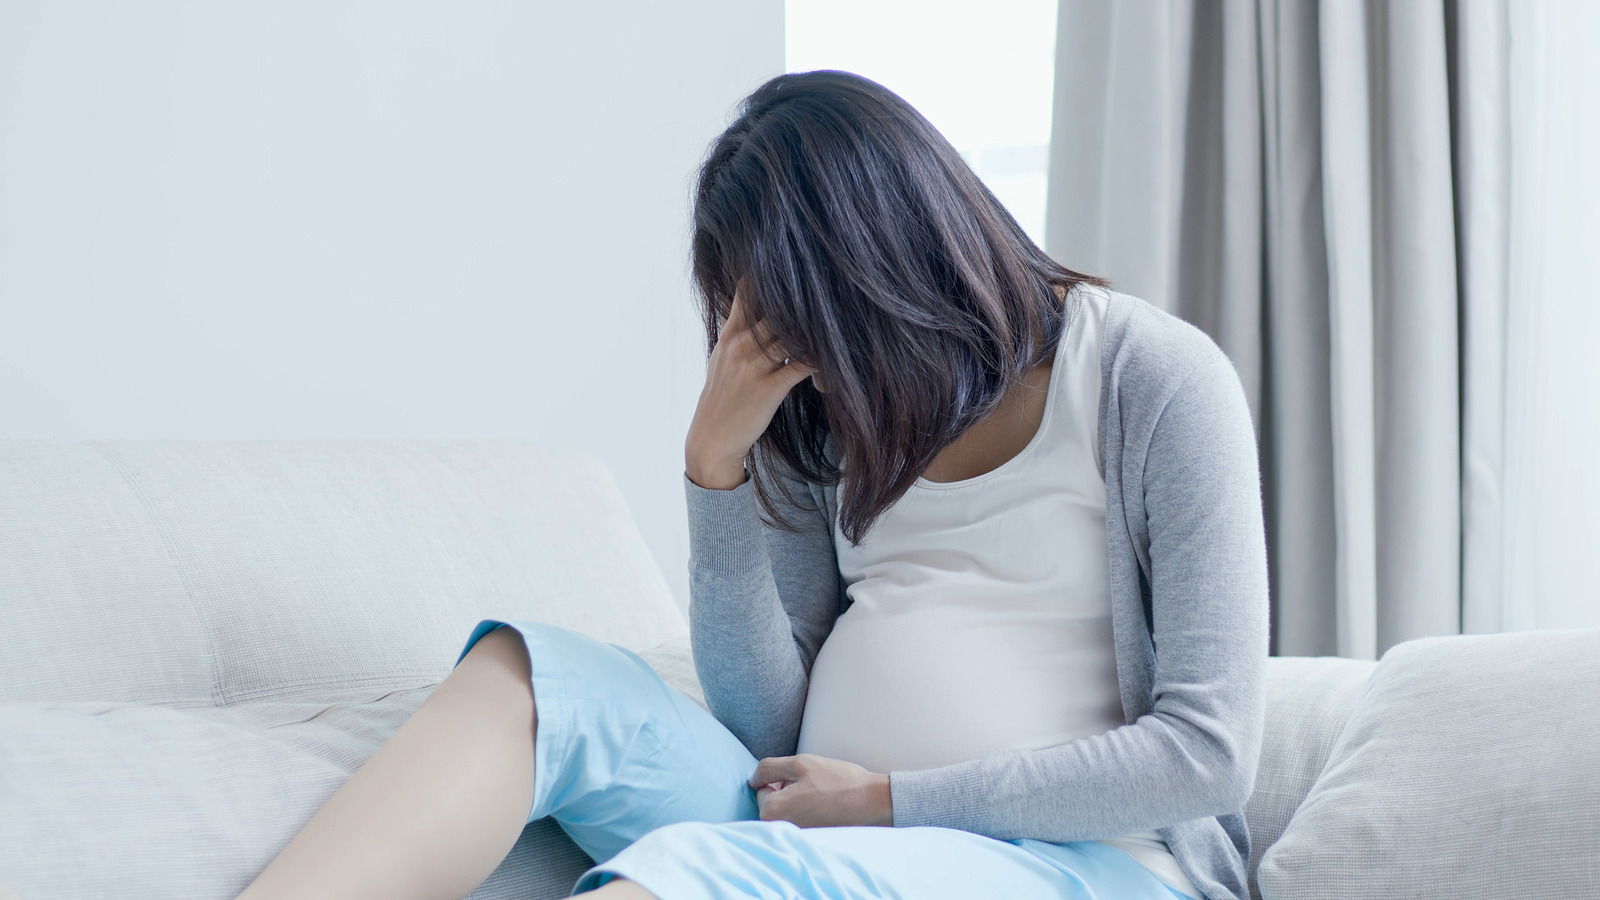 What happens if you get food poisoning while pregnant?